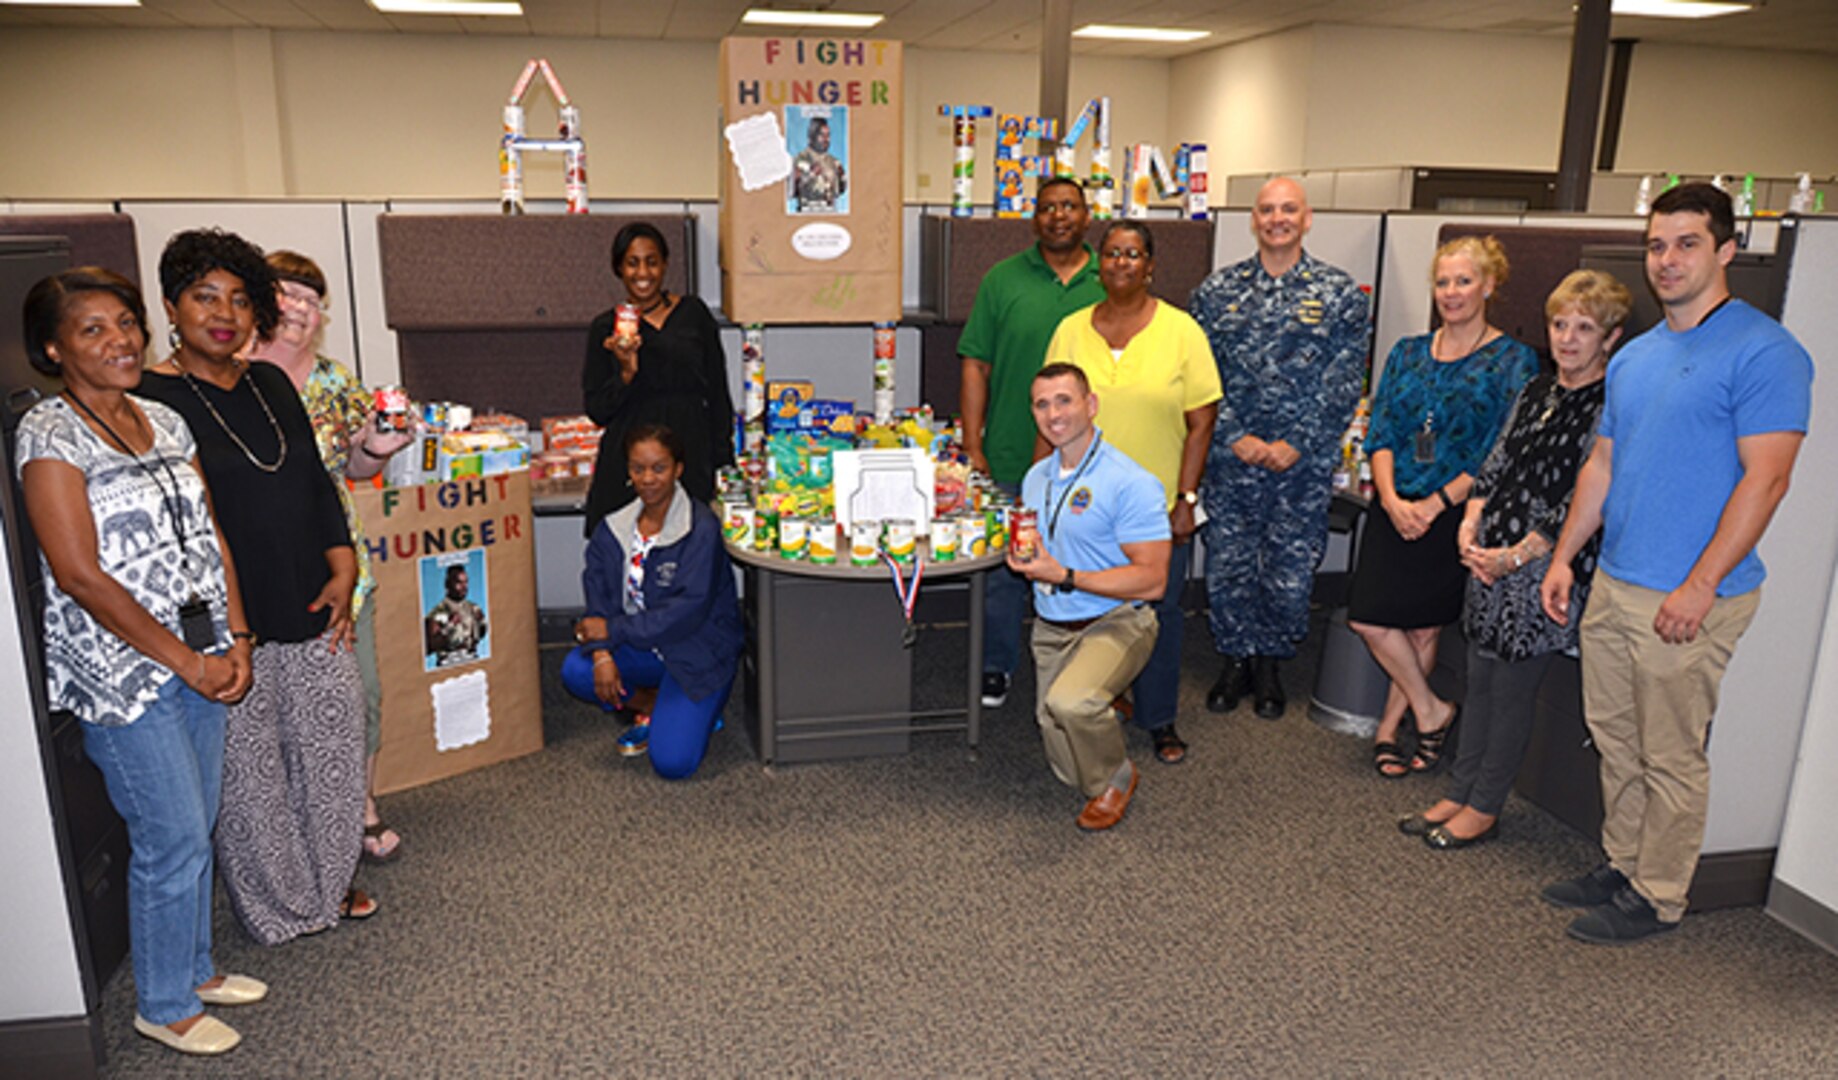 The Food Bank Team, made up of employees from DLA Aviation Supplier Operations and Planning Process Directorates, poses with their display June 7, 2017.  The temporary team, formed to build morale and comradery, collected almost 600 items for Downtown Churches United in Petersburg, Virginia. 